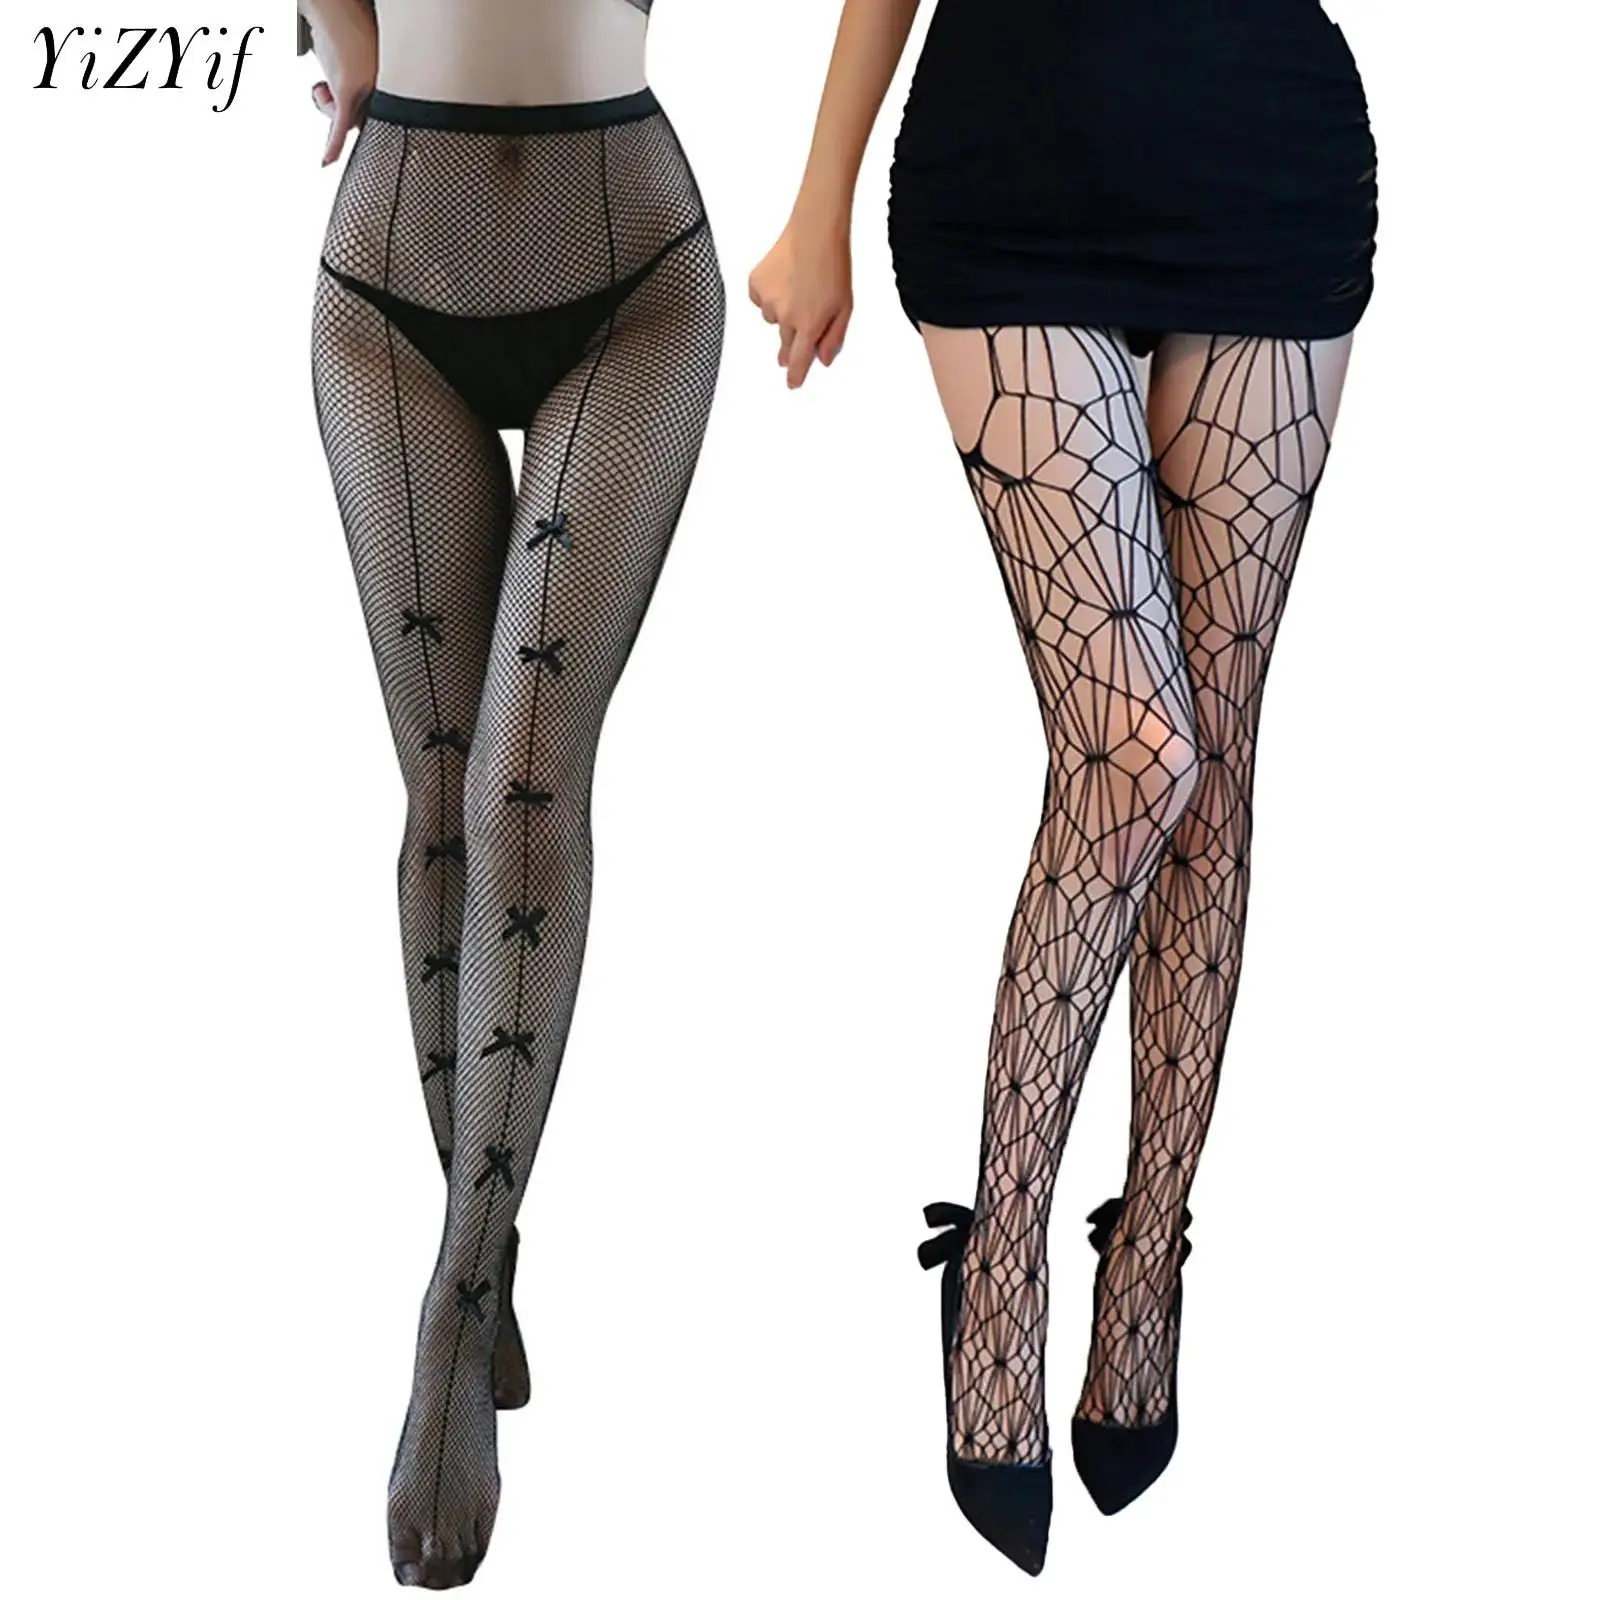 

1Pair Women Sexy Stockings Double G Fishnet Black Tights Woman Small Mesh Patterned Hollow Out Crotchless Fishnets Pantyhoses